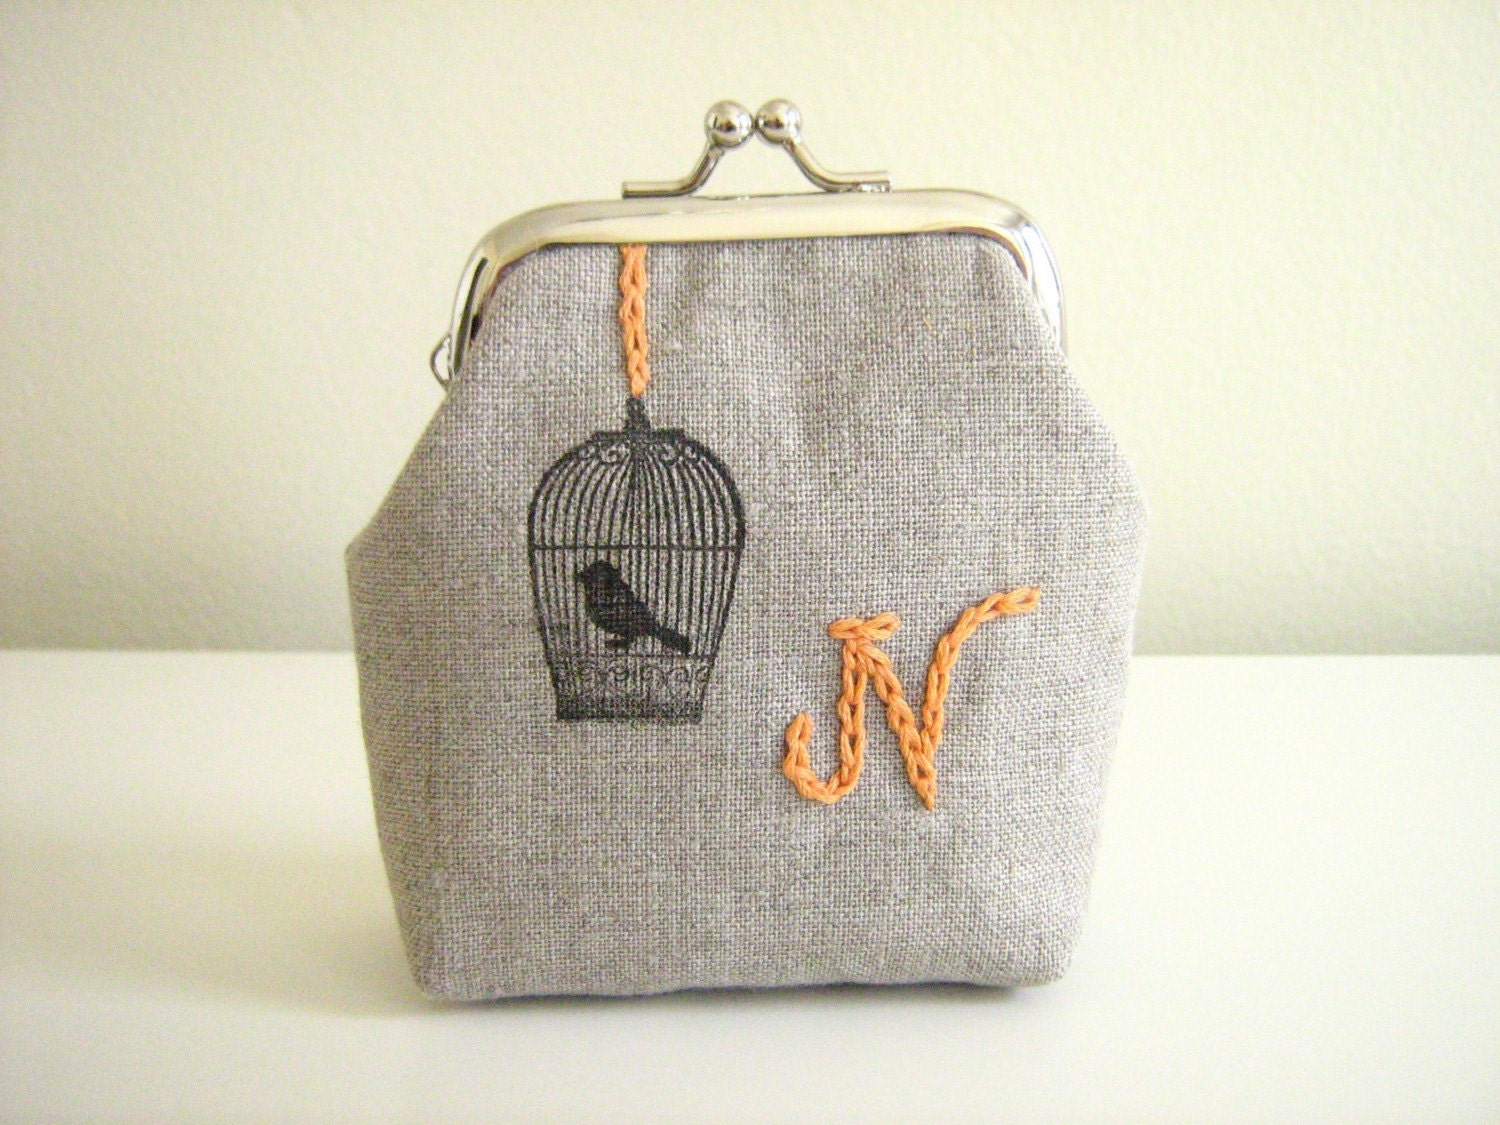 Choose your own Initial- Bird in a Cage mini clasp purse- ships free to U.S. and Canada